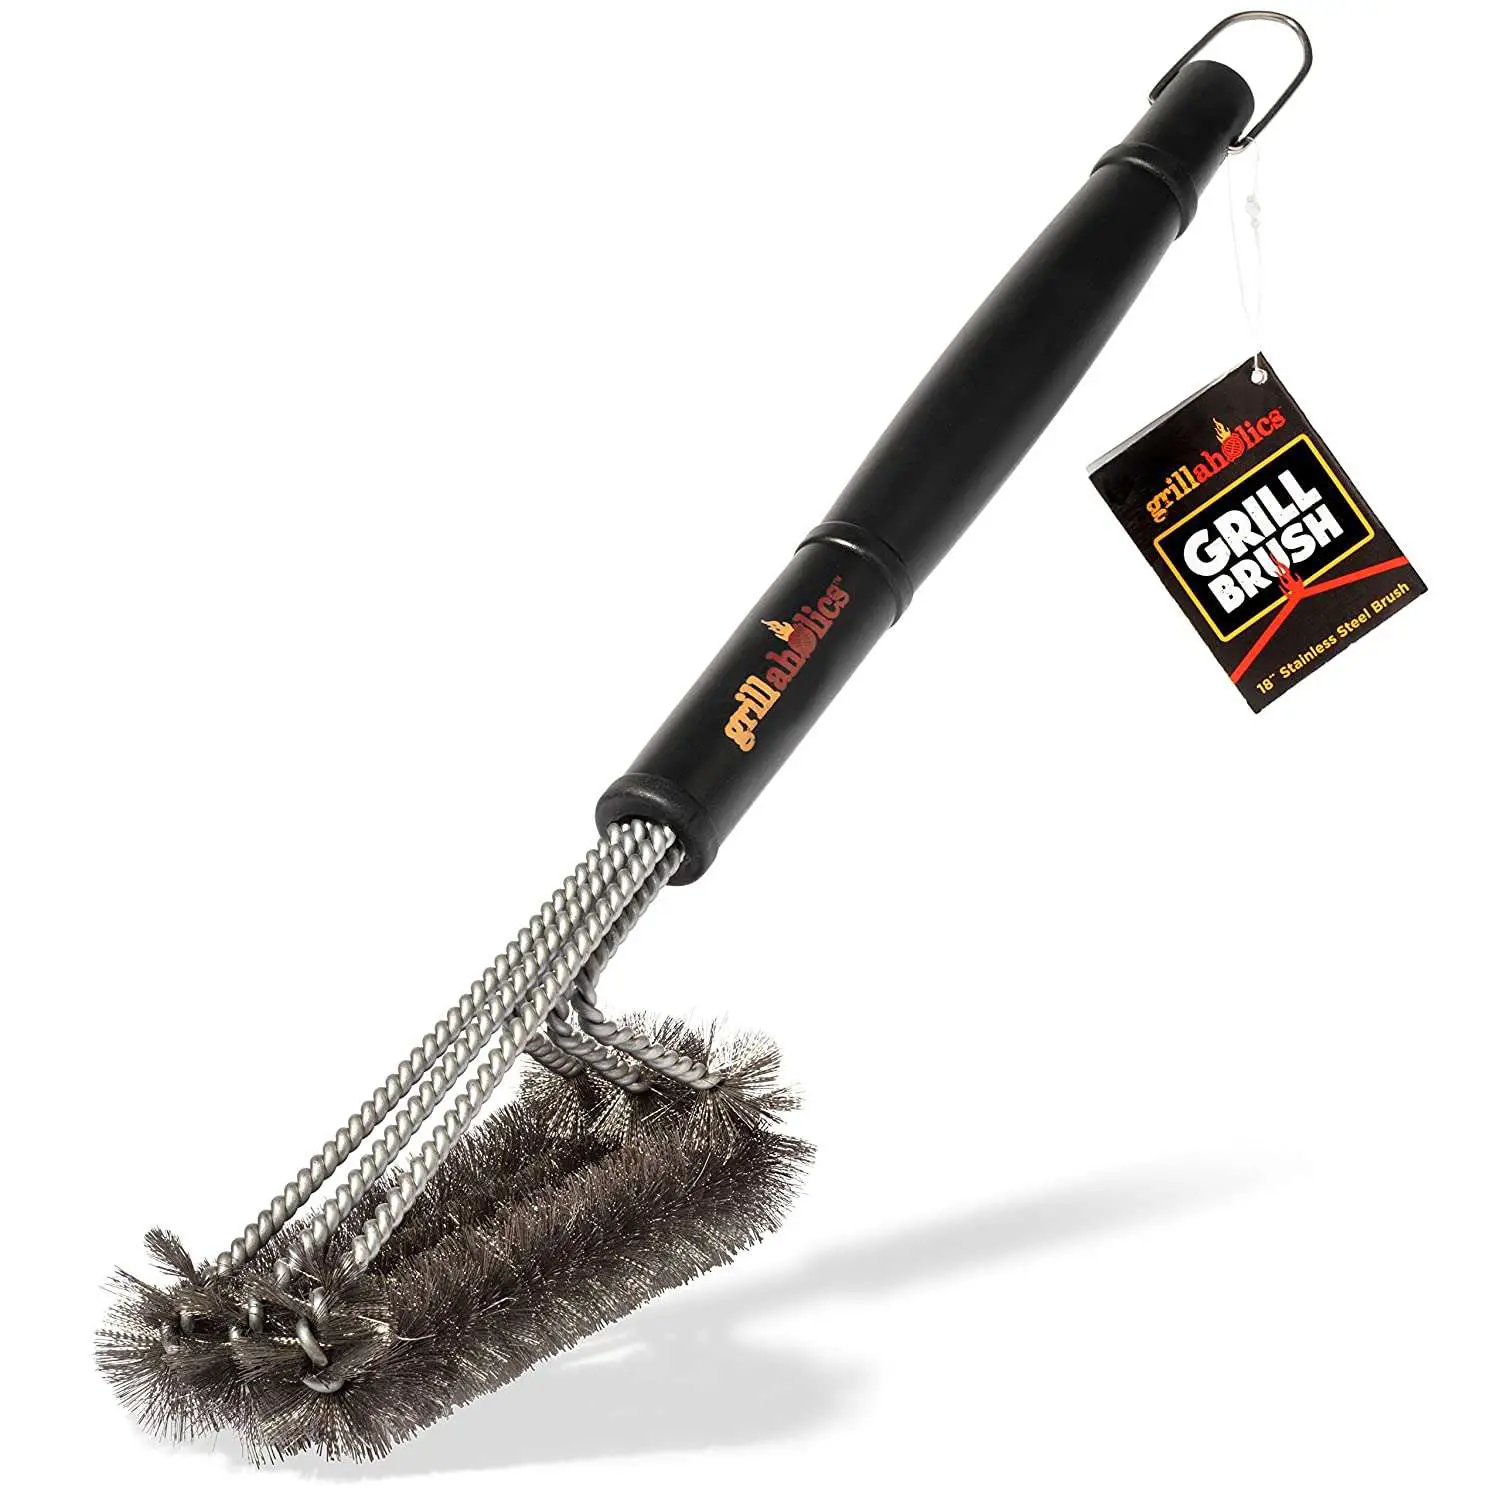 Best Grill Brush Reviews 2019: Top 5+ Recommended